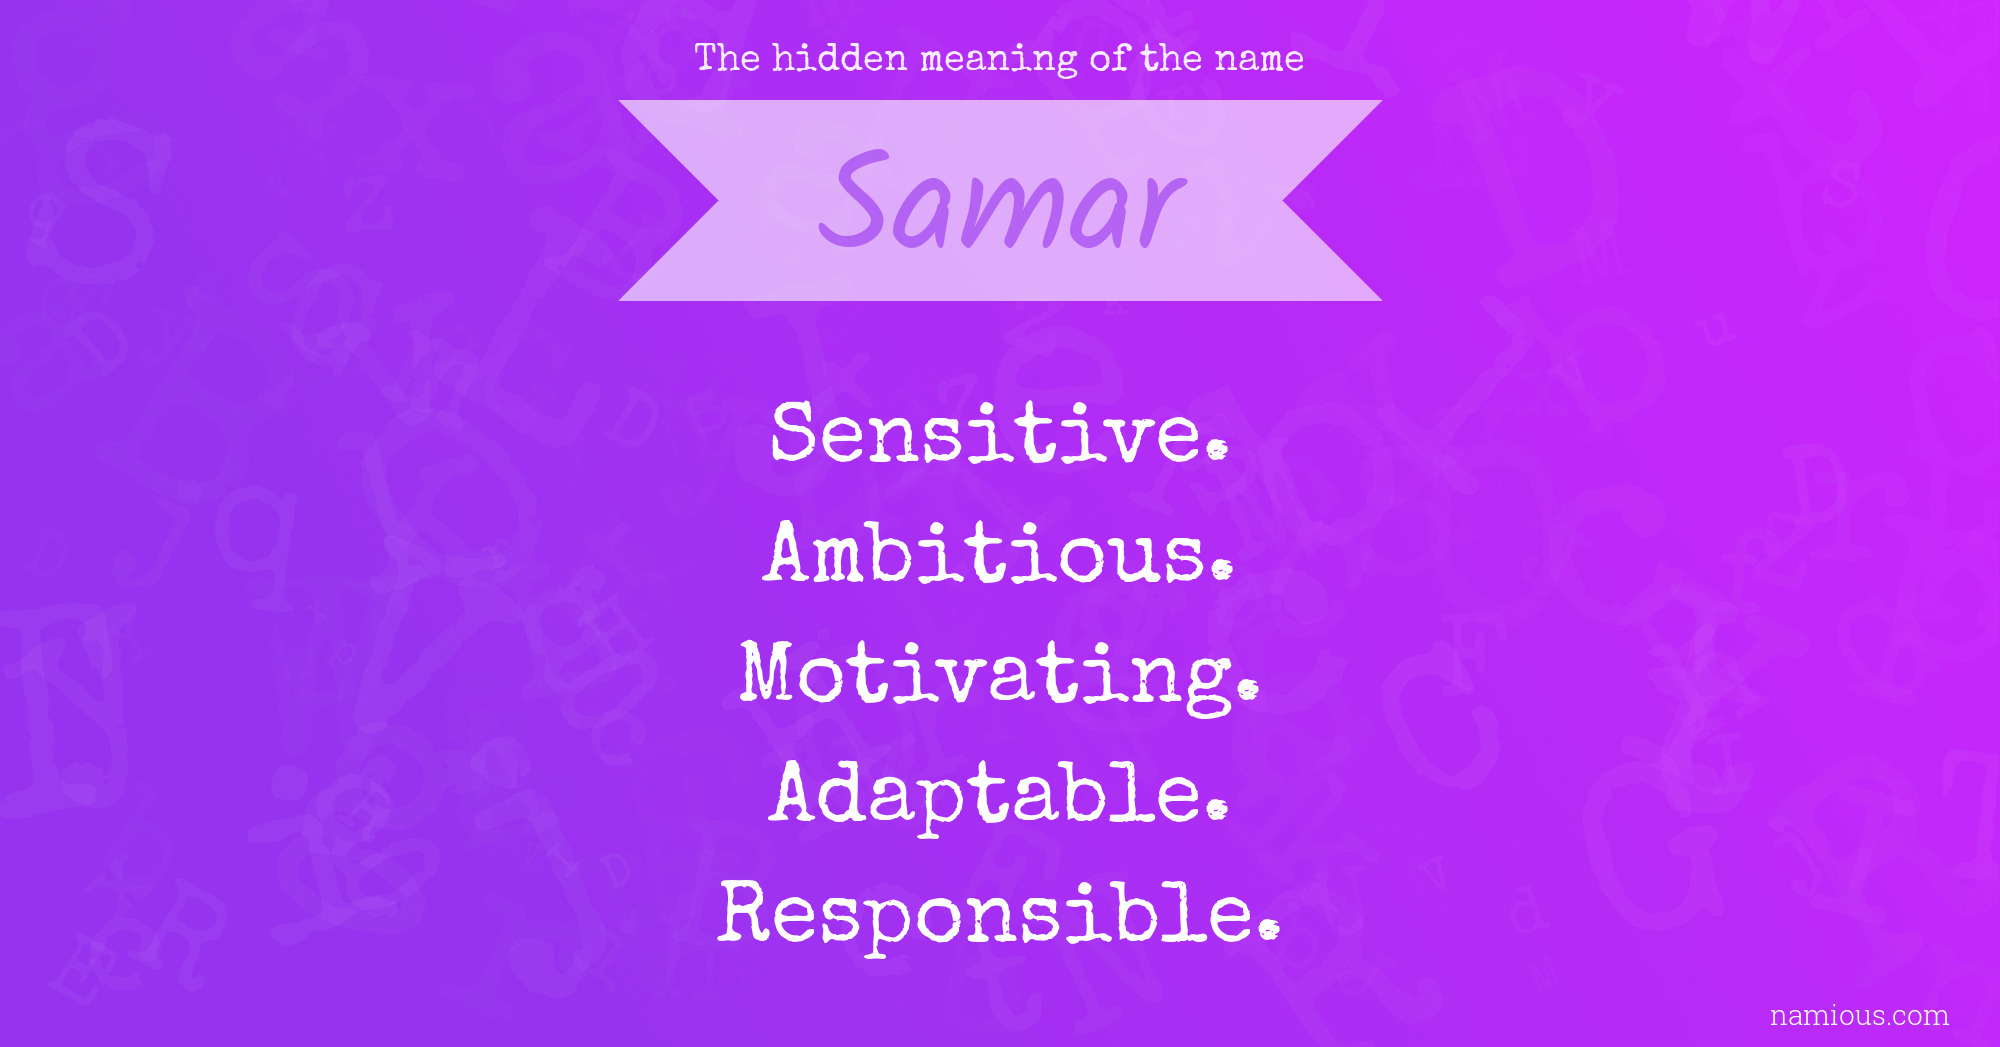 The hidden meaning of the name Samar